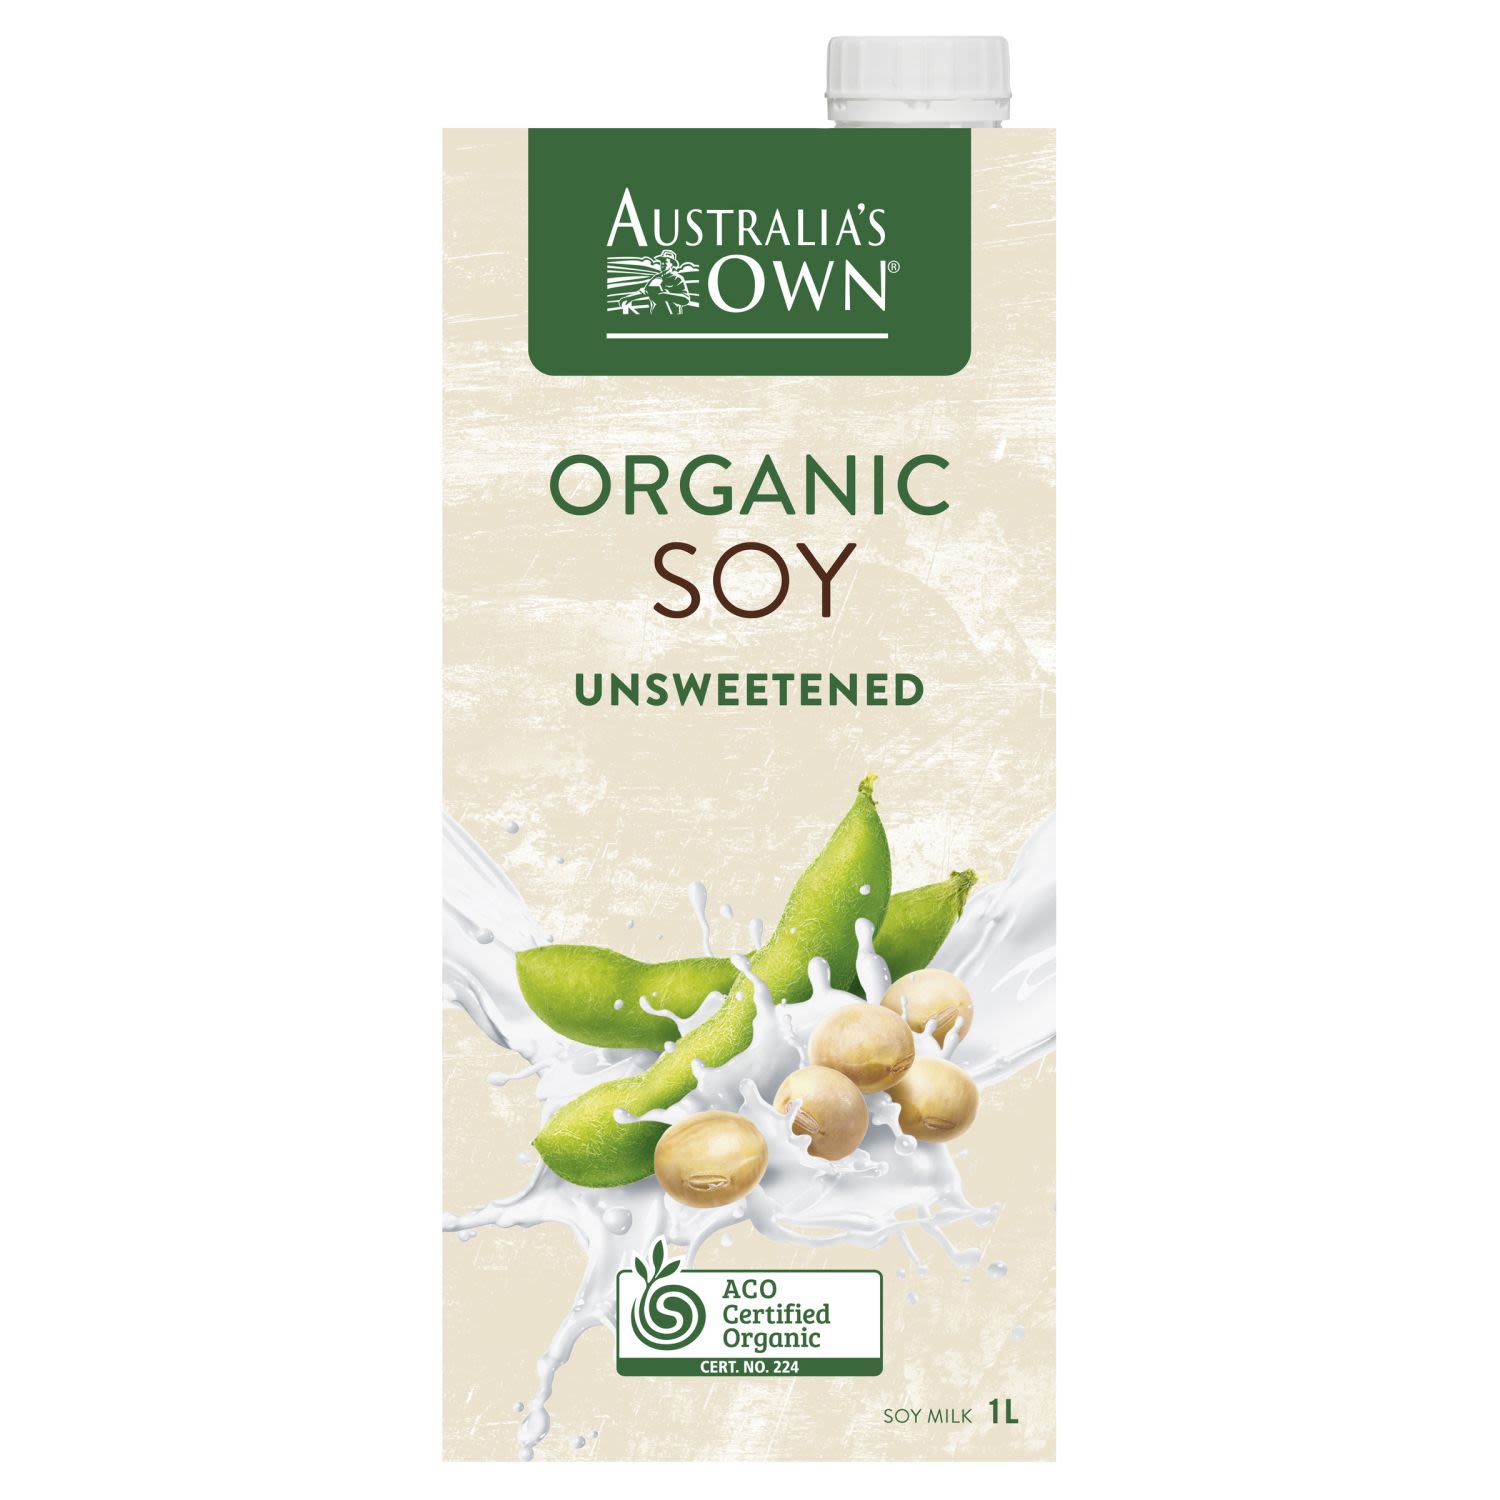 The quality of our Australia's Own Organic Unsweetened Soy Milk is a reflection of our commitment to bring Australians the best.

We source ingredients from farmers who share our passion and adhere to our strict Australia's Own Organic quality standards.

Thank you for choosing Australia's Own.

Australian owned since 1995.

Free from GM ingredients, cholesterol, artificial colours, flavours and preservatives. Vegan friendly.<br /> <br />